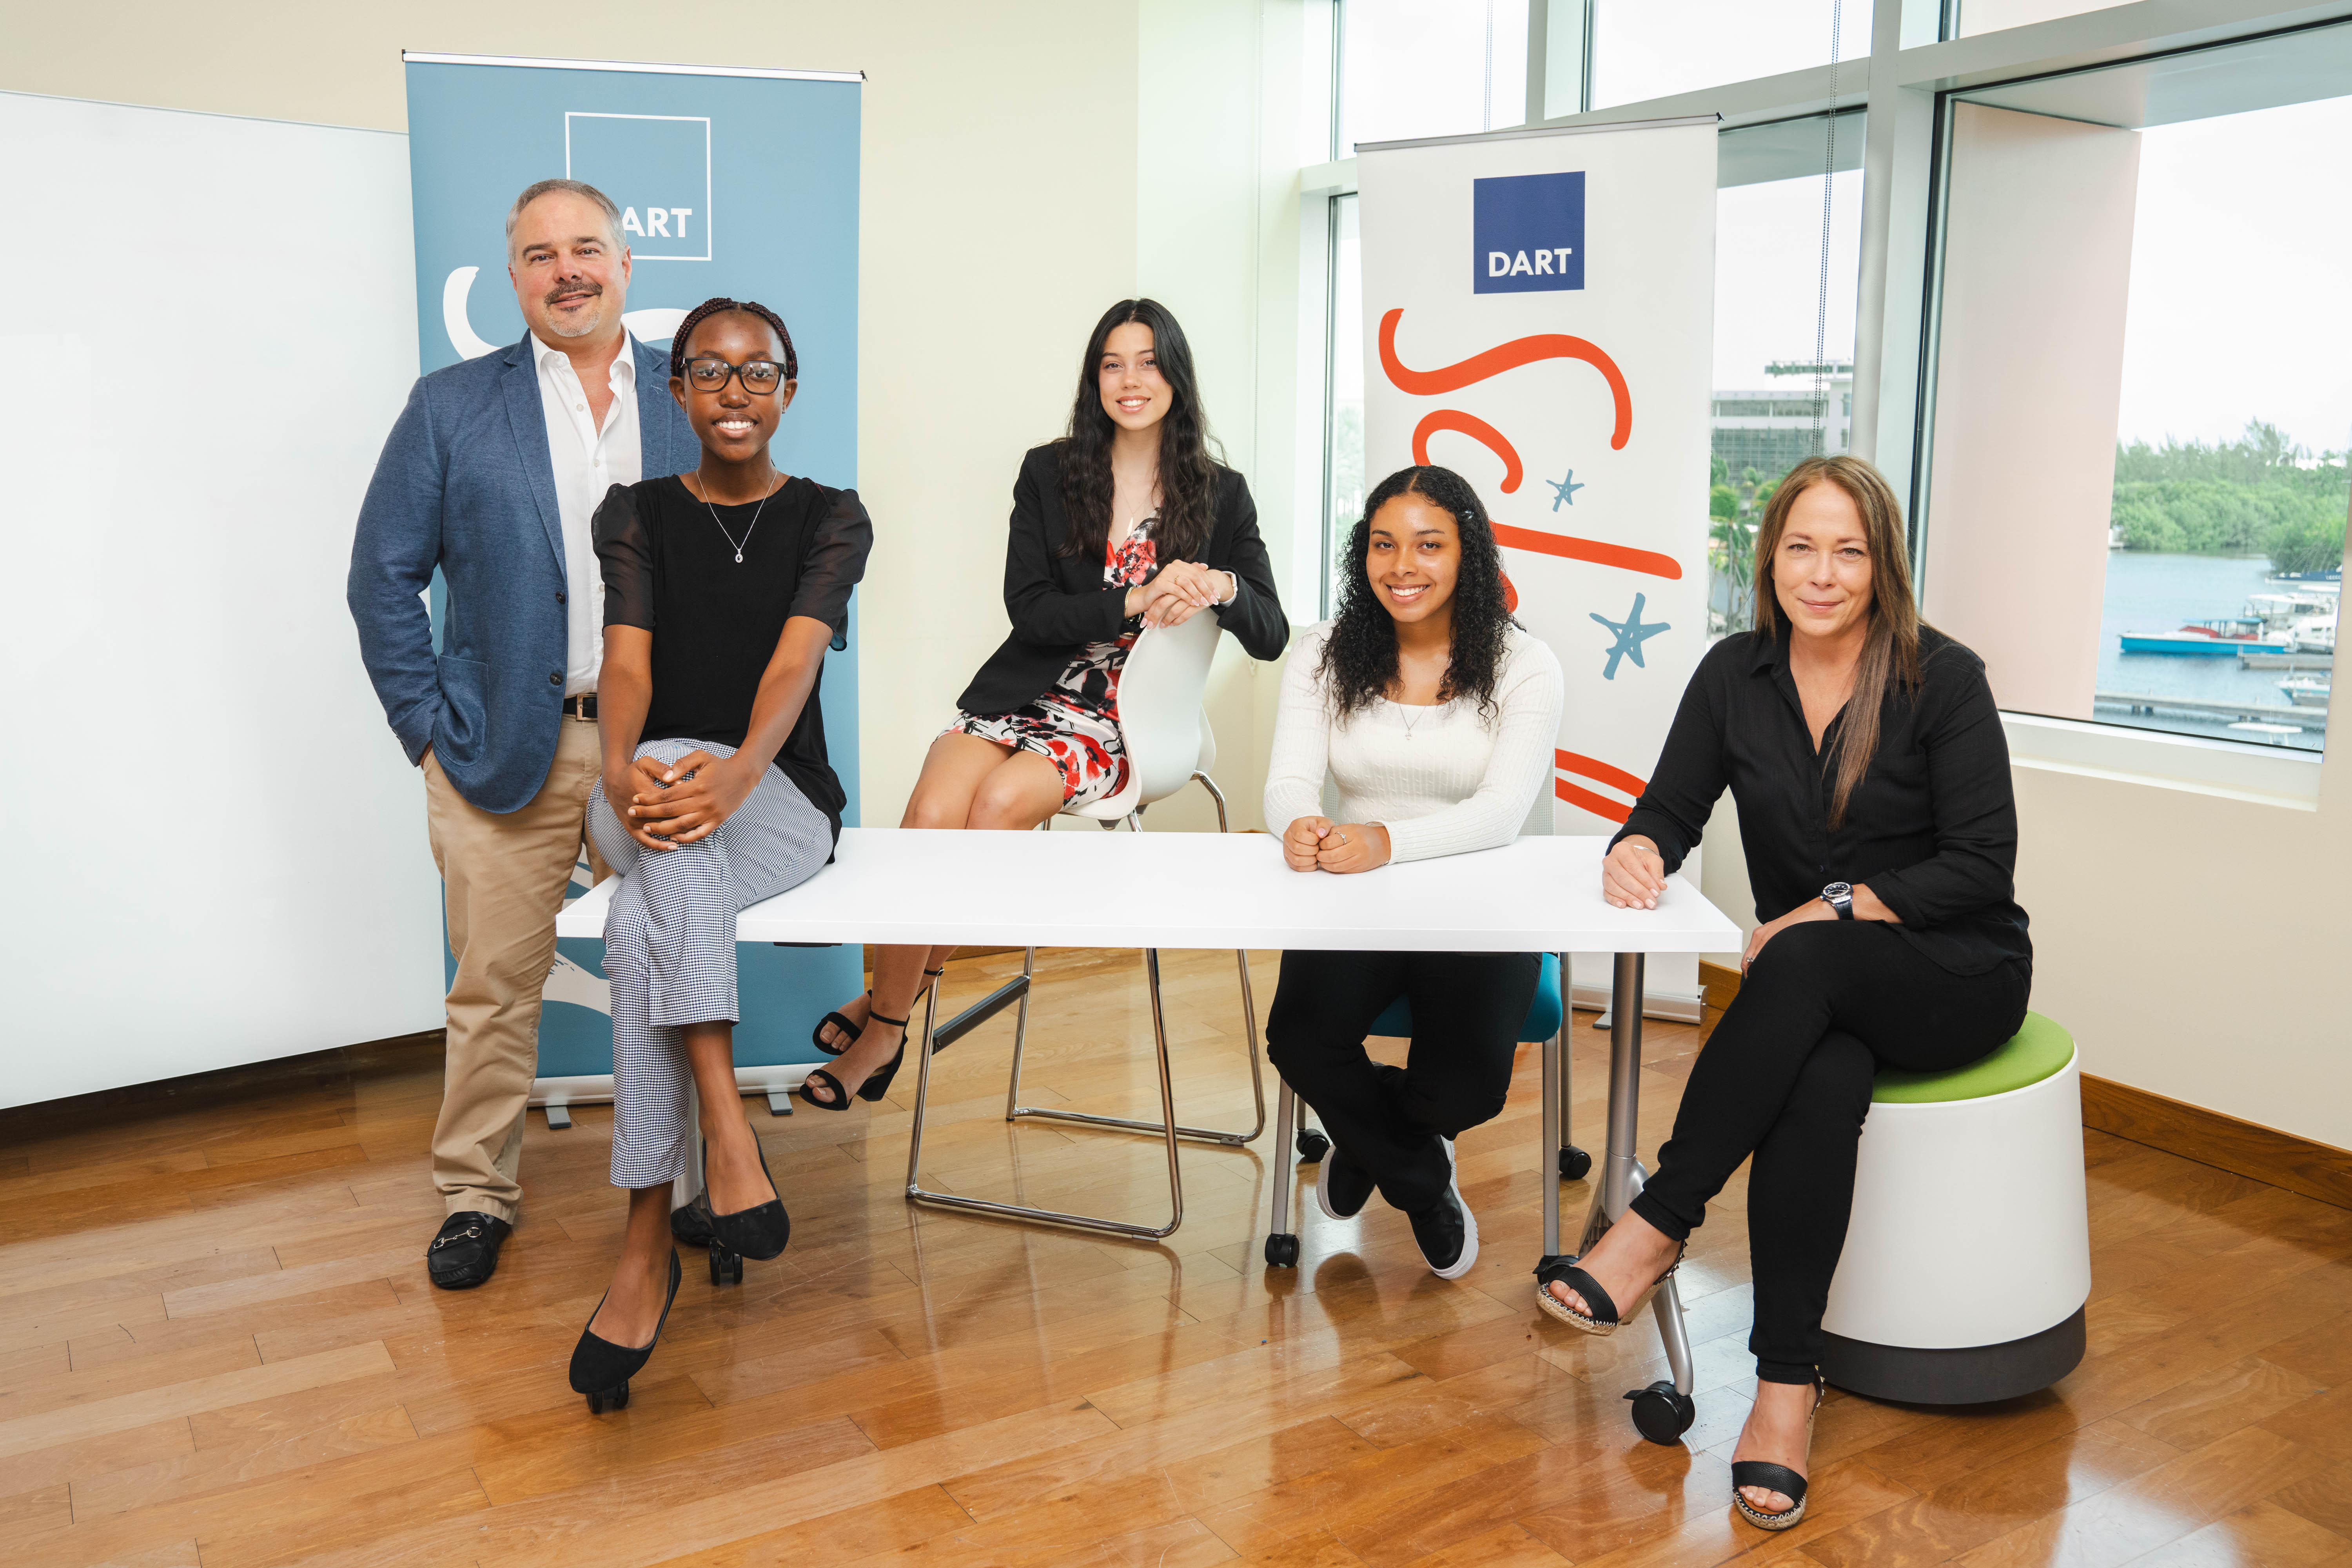 (from left to right) Dart CEO Mark VanDevelde; Dart Scholars Kyla Machingambi, Leila Sulliman-Maw and Alison Owens; and Dart Director Jackie Doak